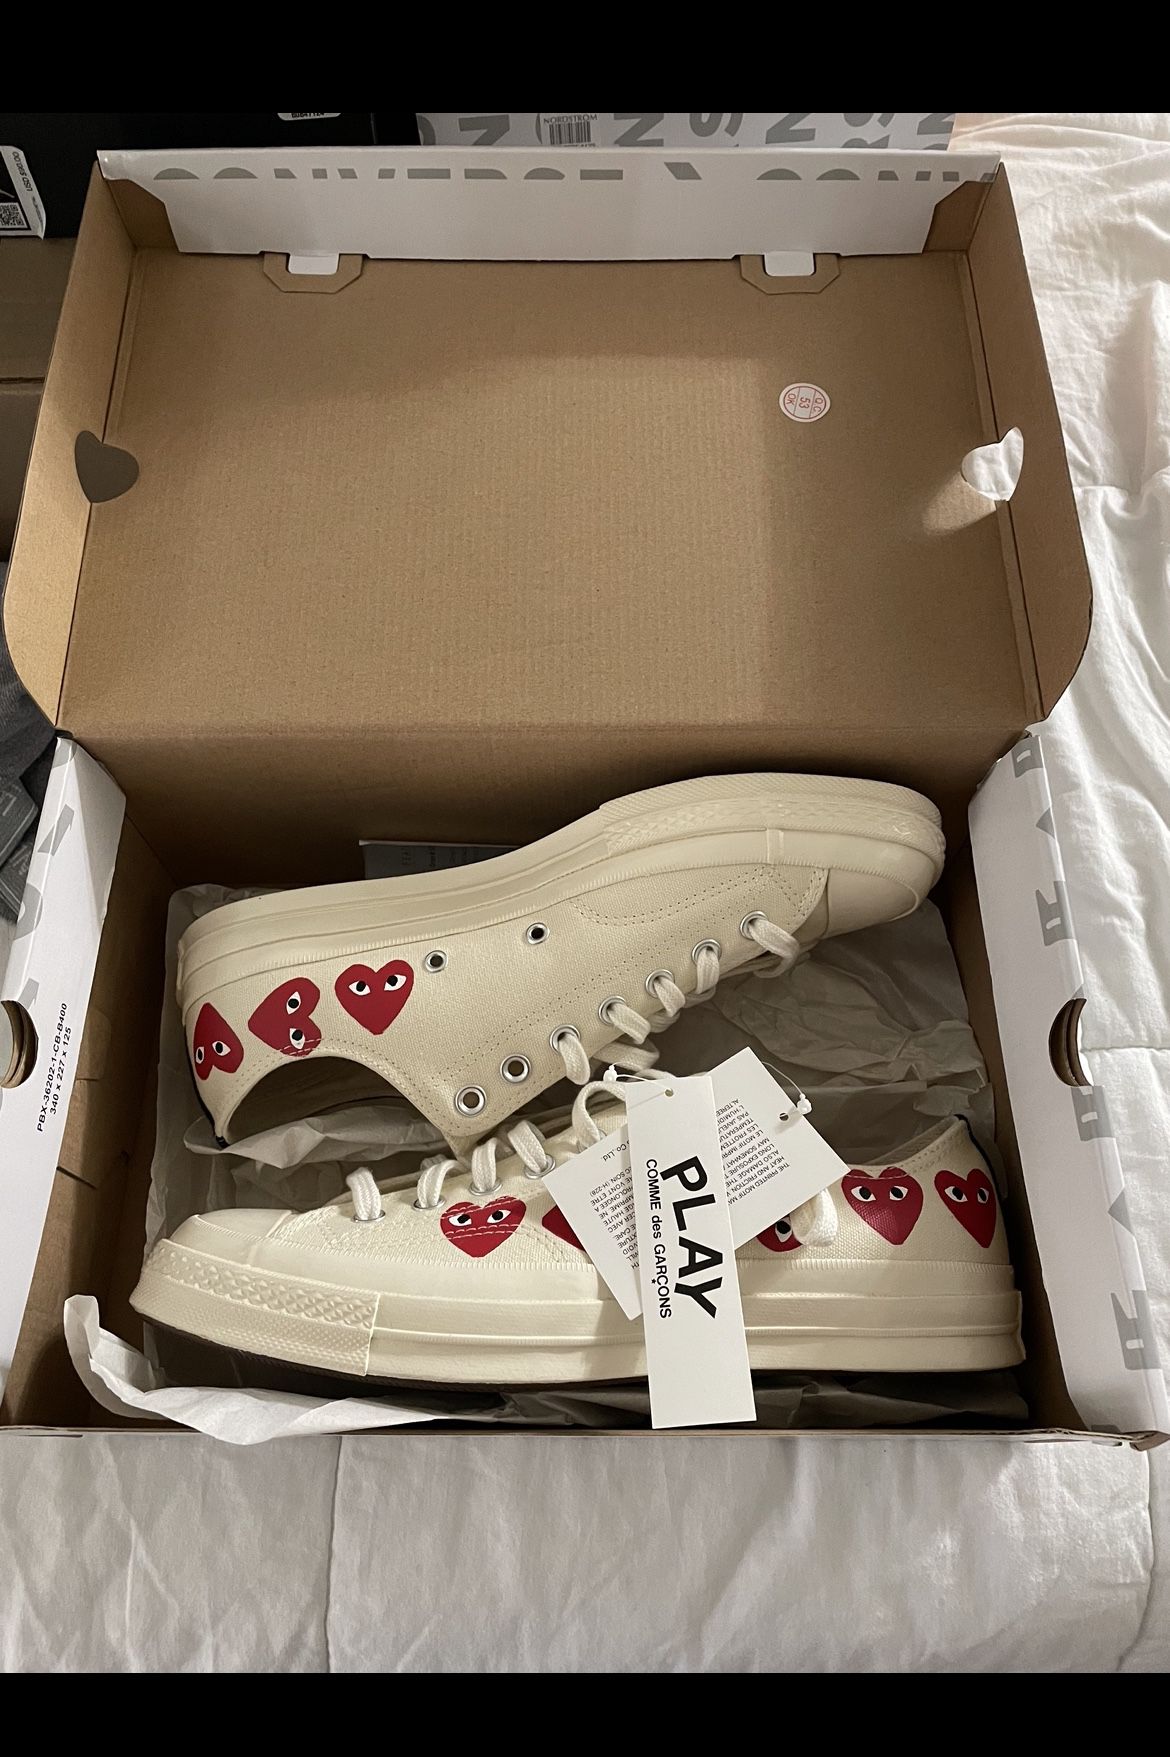 Comme - Converse (new) Size 10